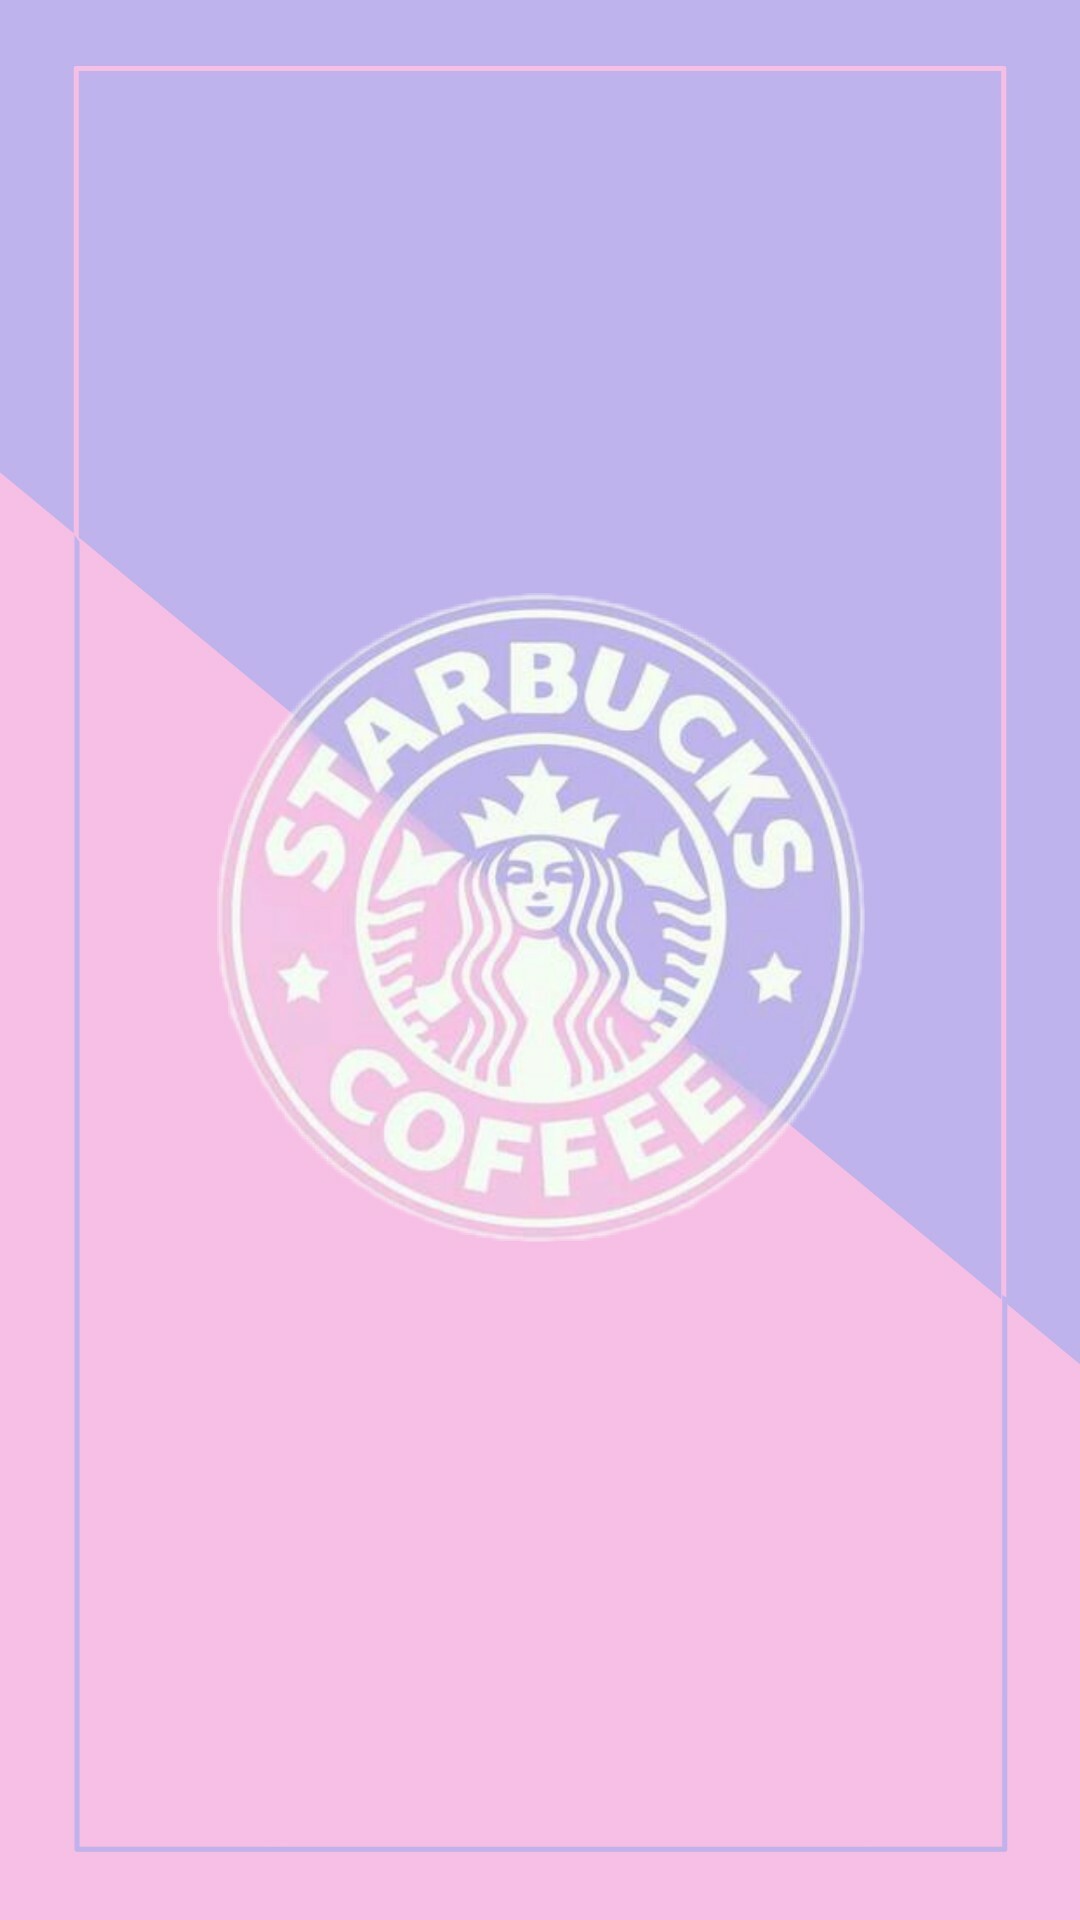 Starbucks: The premier roaster and retailer of specialty coffee in the world. 1080x1920 Full HD Wallpaper.